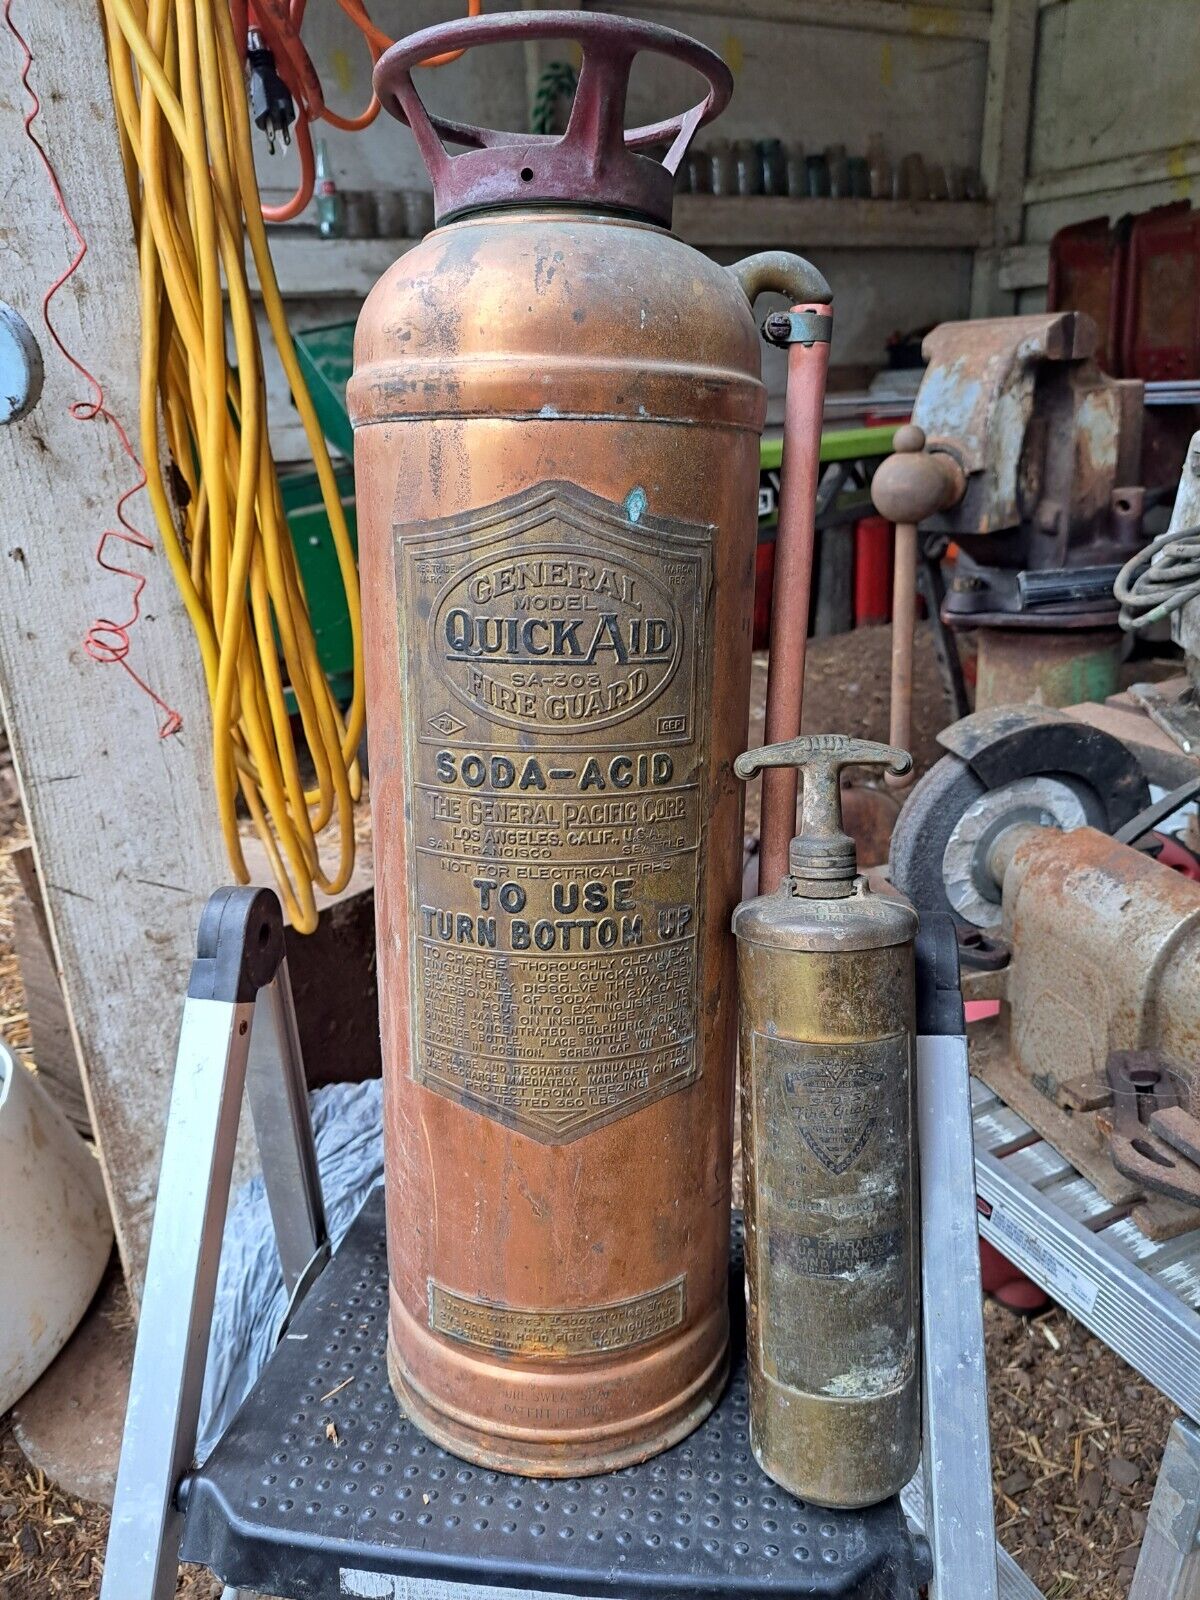 general quick aid & S-O-S fire guard extinguishers